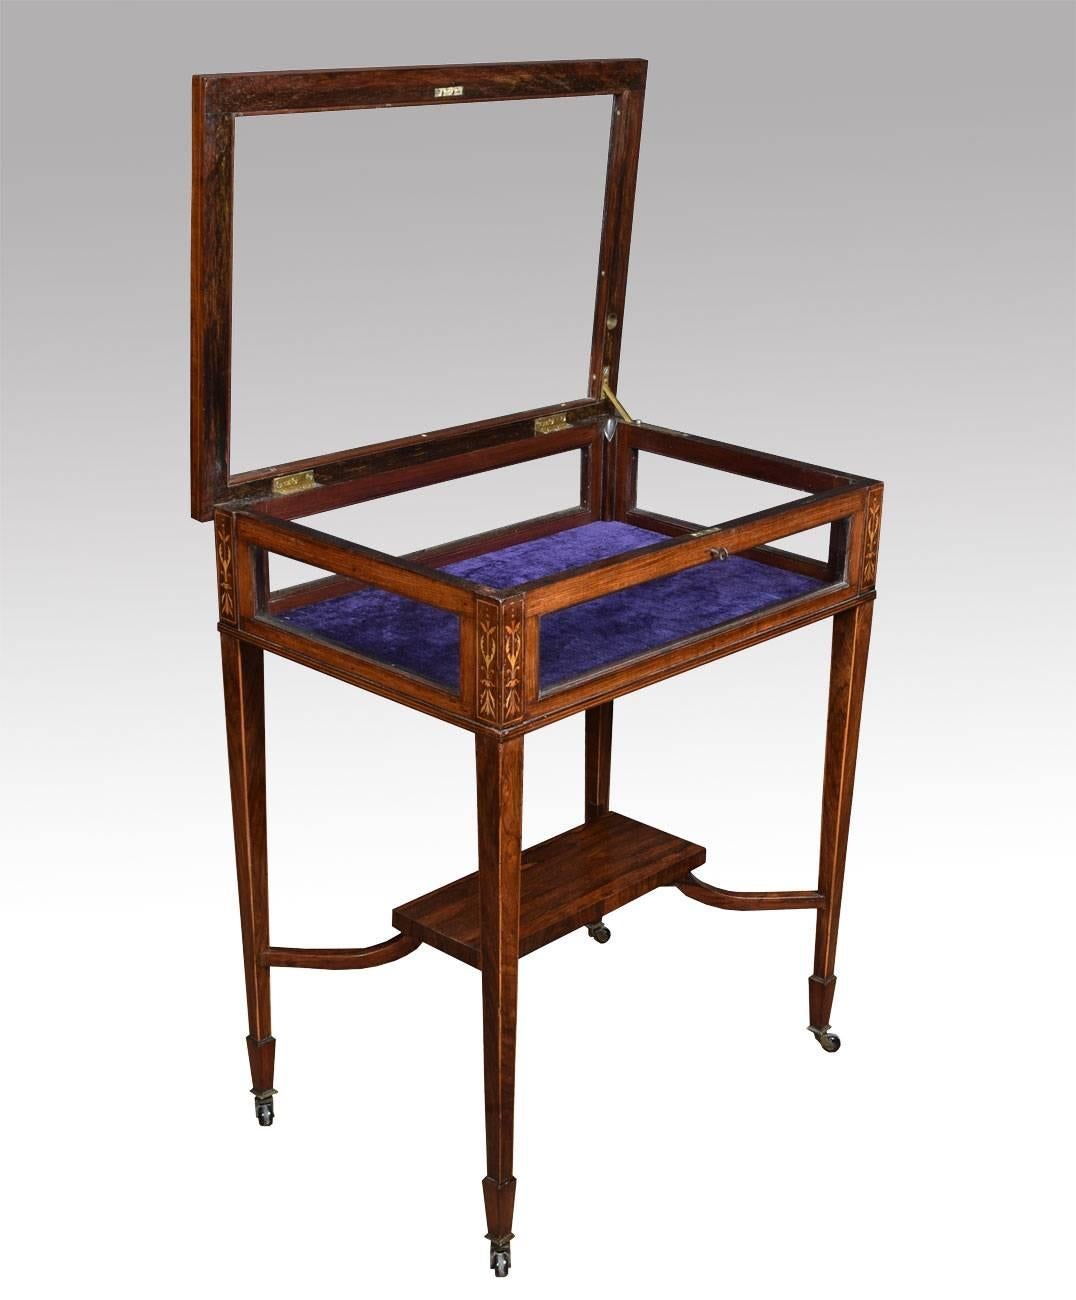 Edwardian rosewood and inlaid rectangular bijouterie display table, bordered with boxwood lines and decorated with foliate scroll designs, having a hinged glazed panel top and glazed panel sides all raised up on square tapered legs terminating in